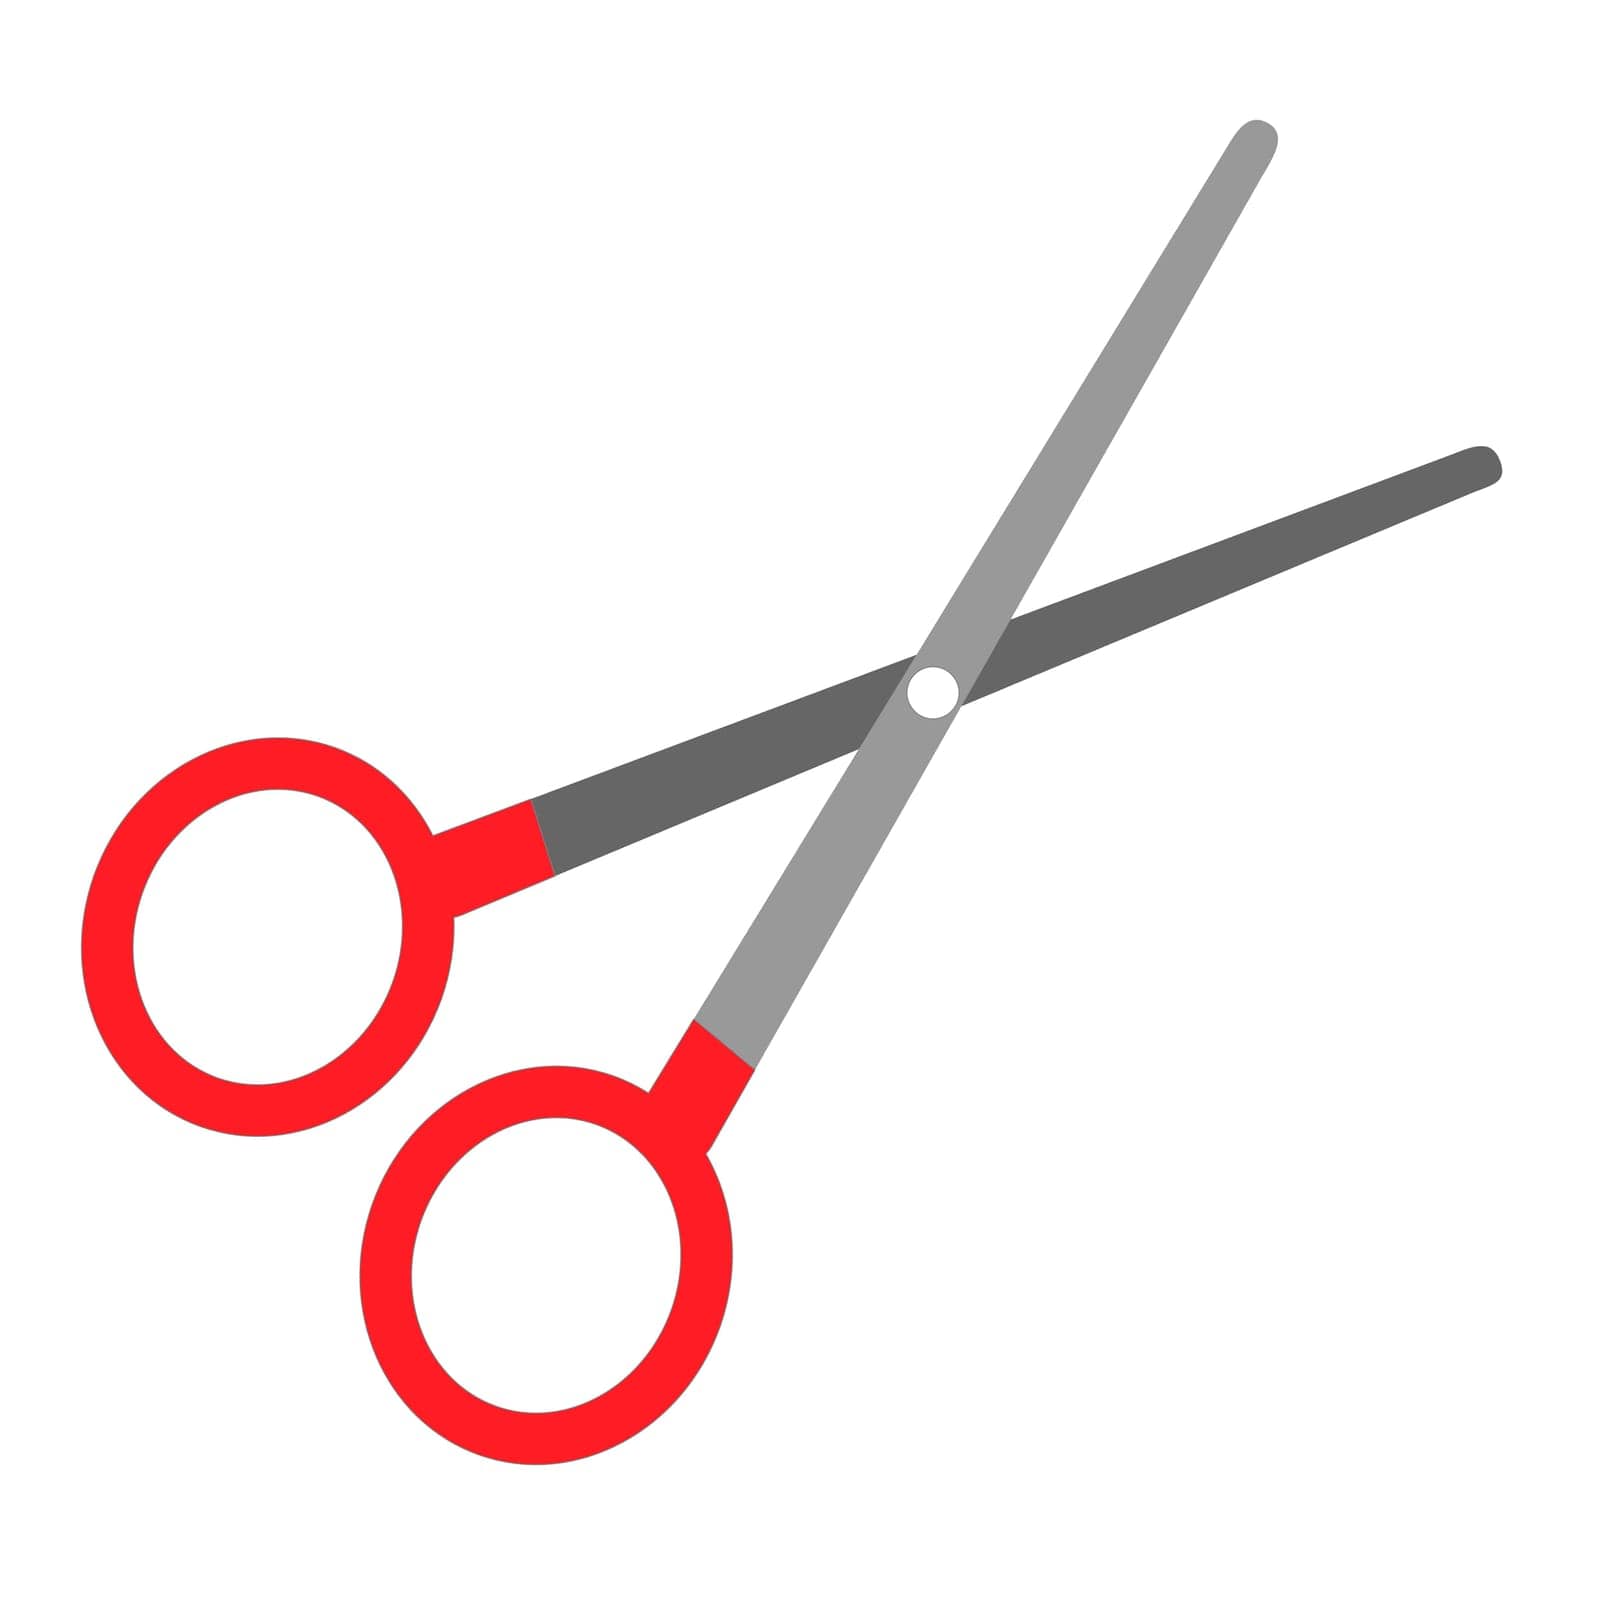 Isolated scissors in a flat style. Vector illustration on white background.